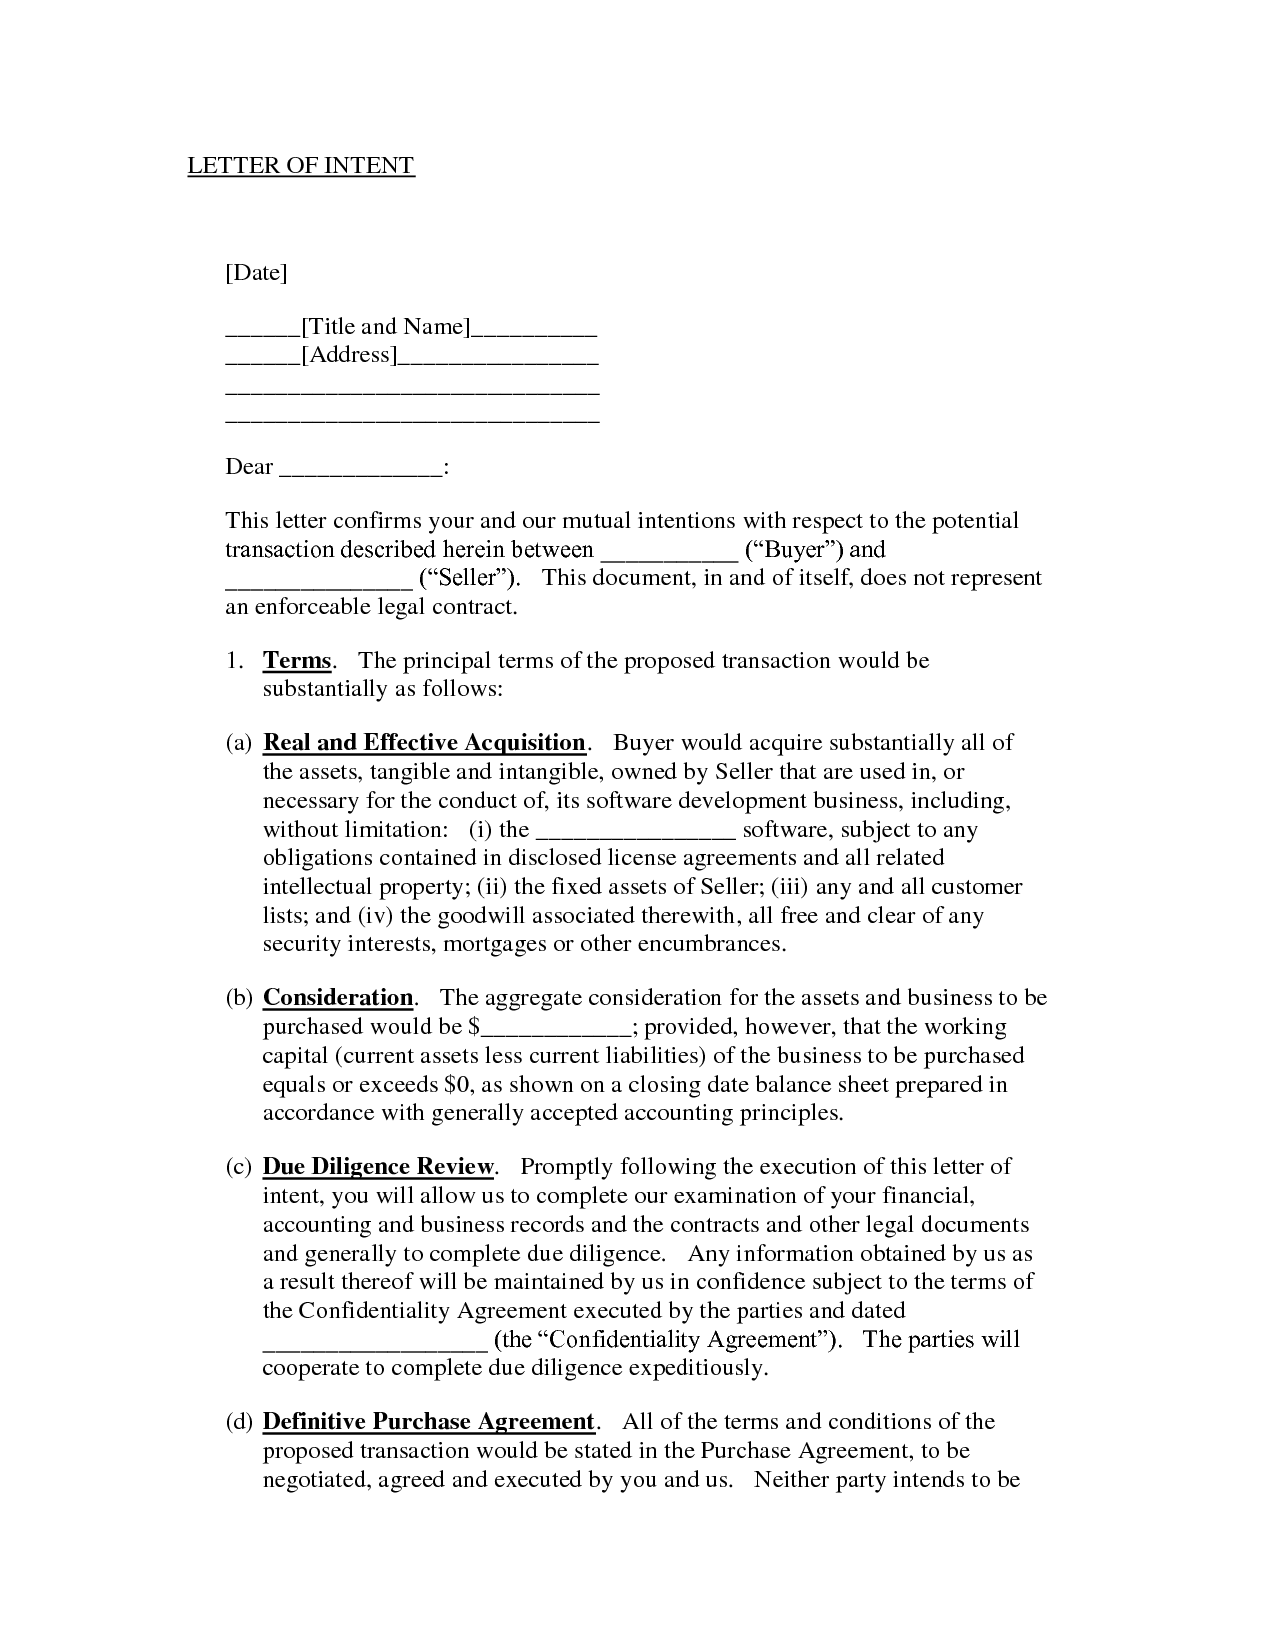 letter of intent contract sample